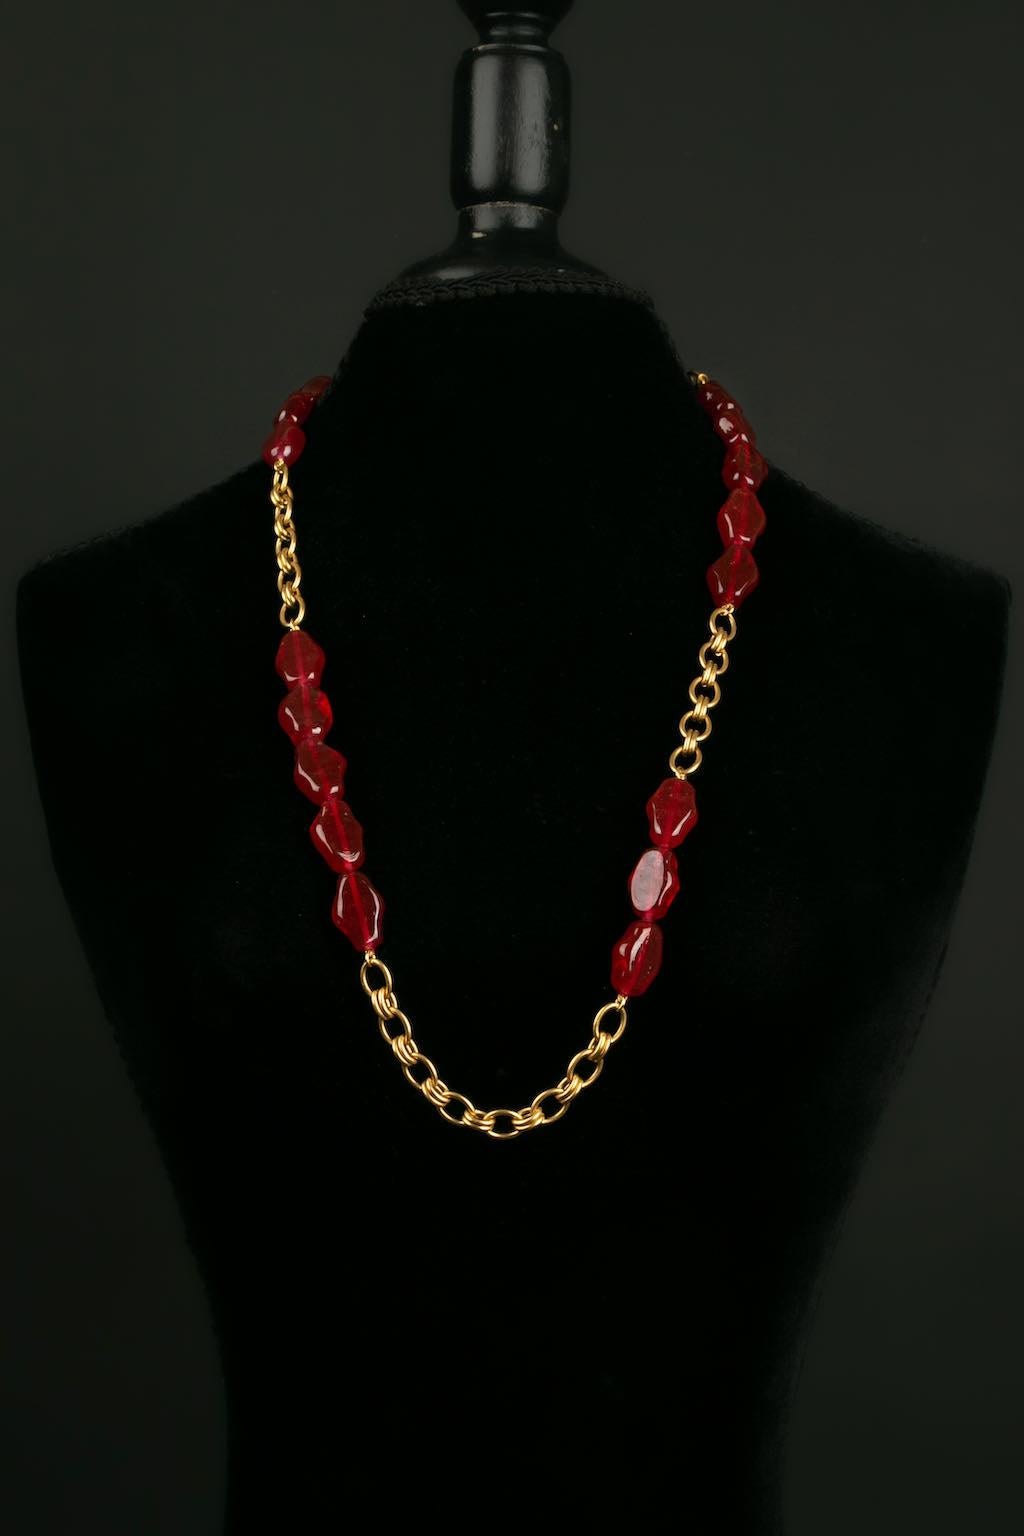 Chanel -Long necklace in gold metal and red glass paste pearls. Collection 1983.

Additional information: 
Dimensions: Length: 83 cm
Condition: Very good condition
Seller Ref number: CB91